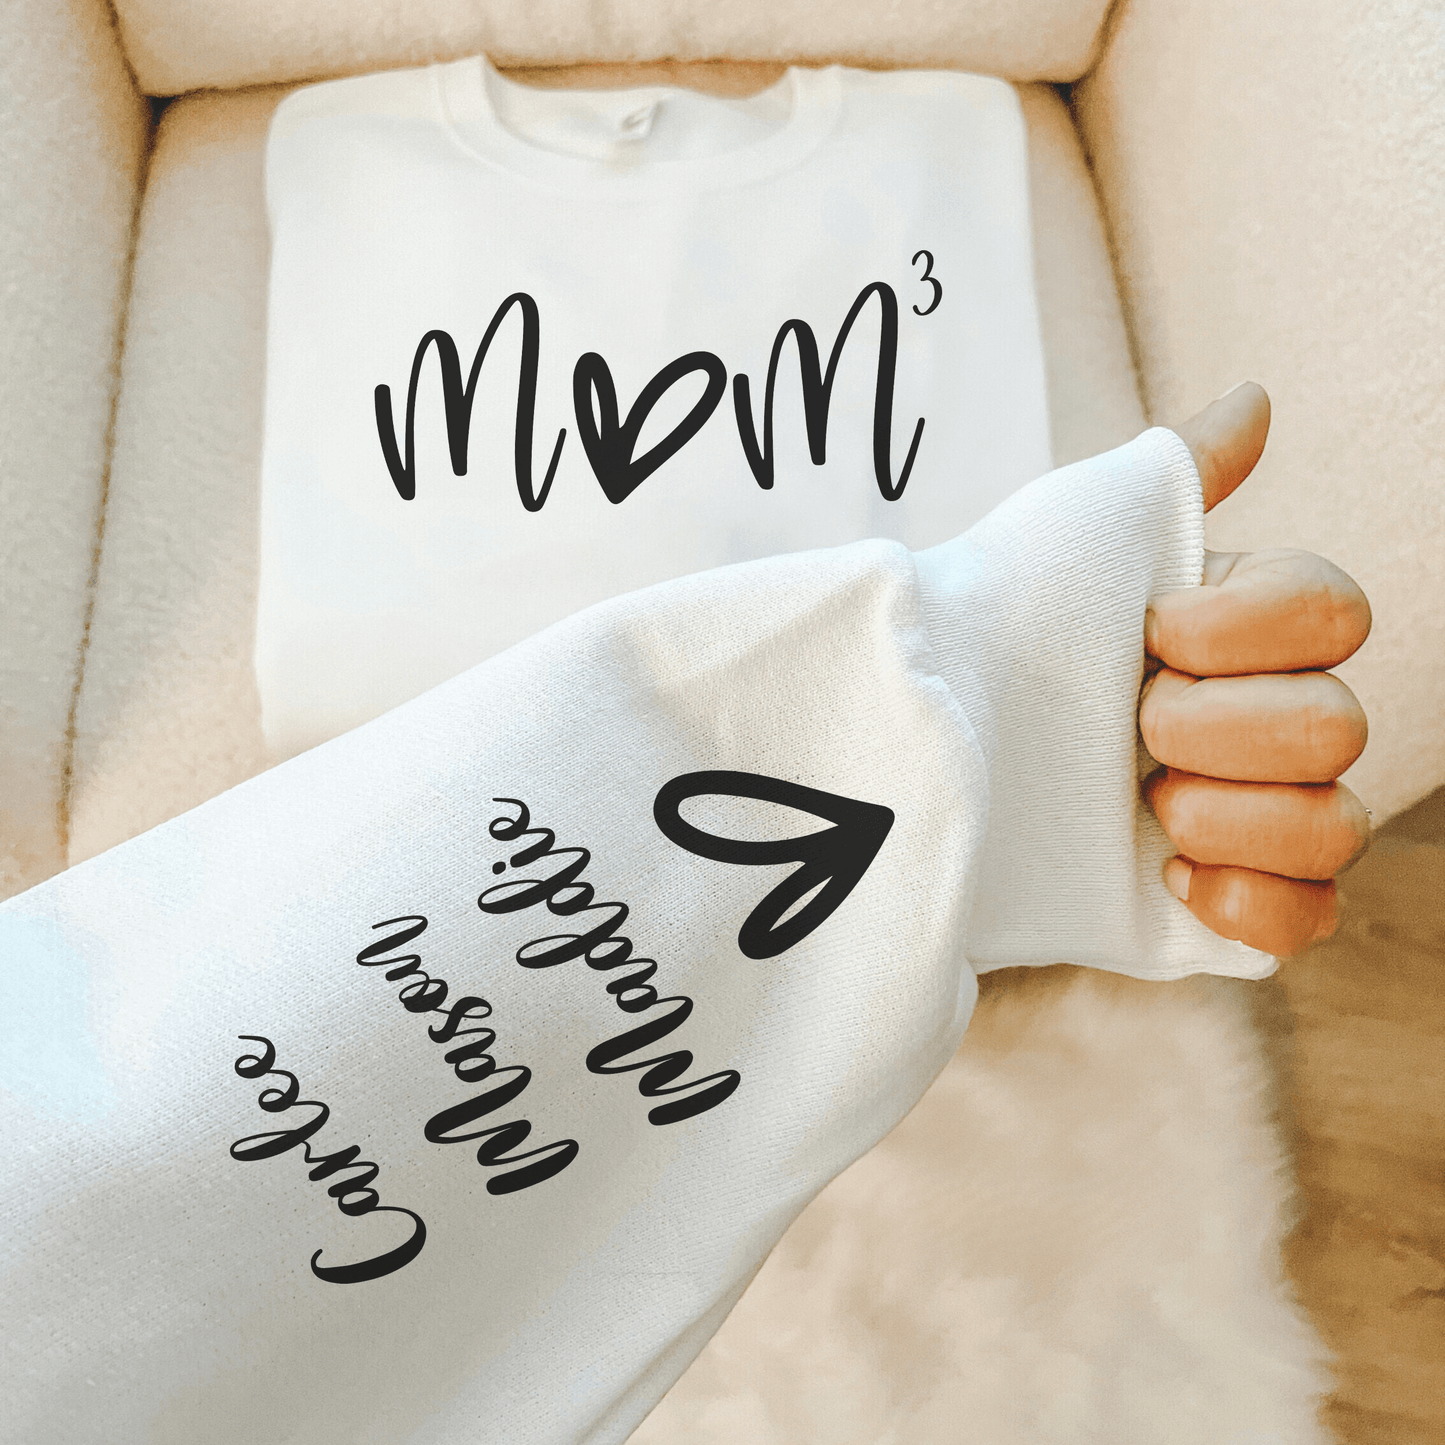 "Mom^N" Customizable Shirt: Personalize with Number of Kids & Names - Ideal Mother's Day Present - GiftHaus